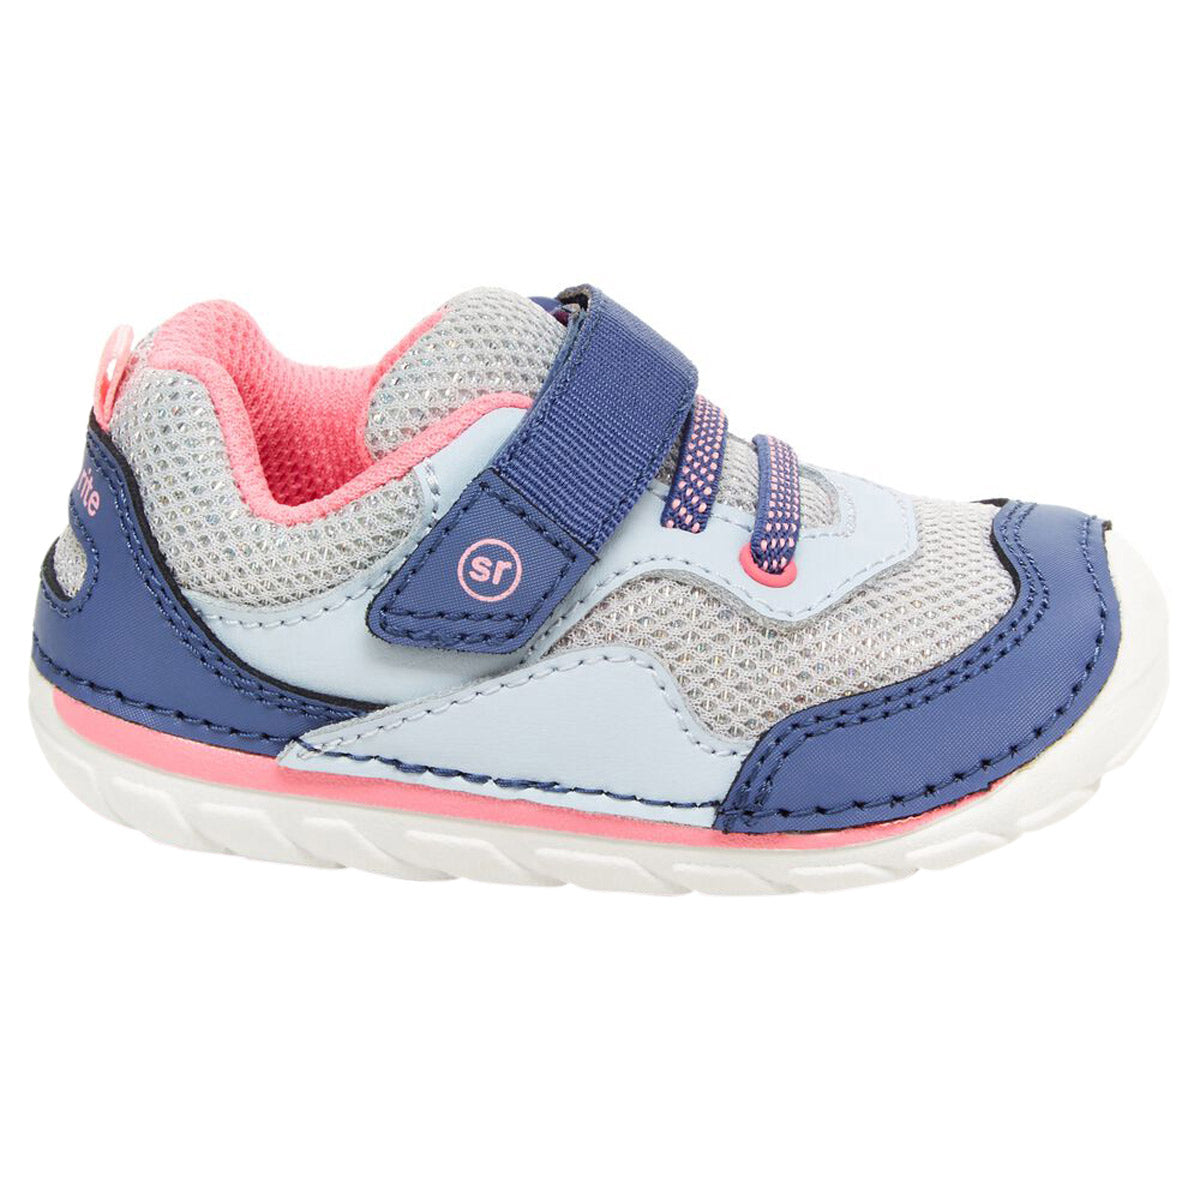 Child's Stride Rite blue and pink toddler sneaker with velcro strap isolated on a white background.